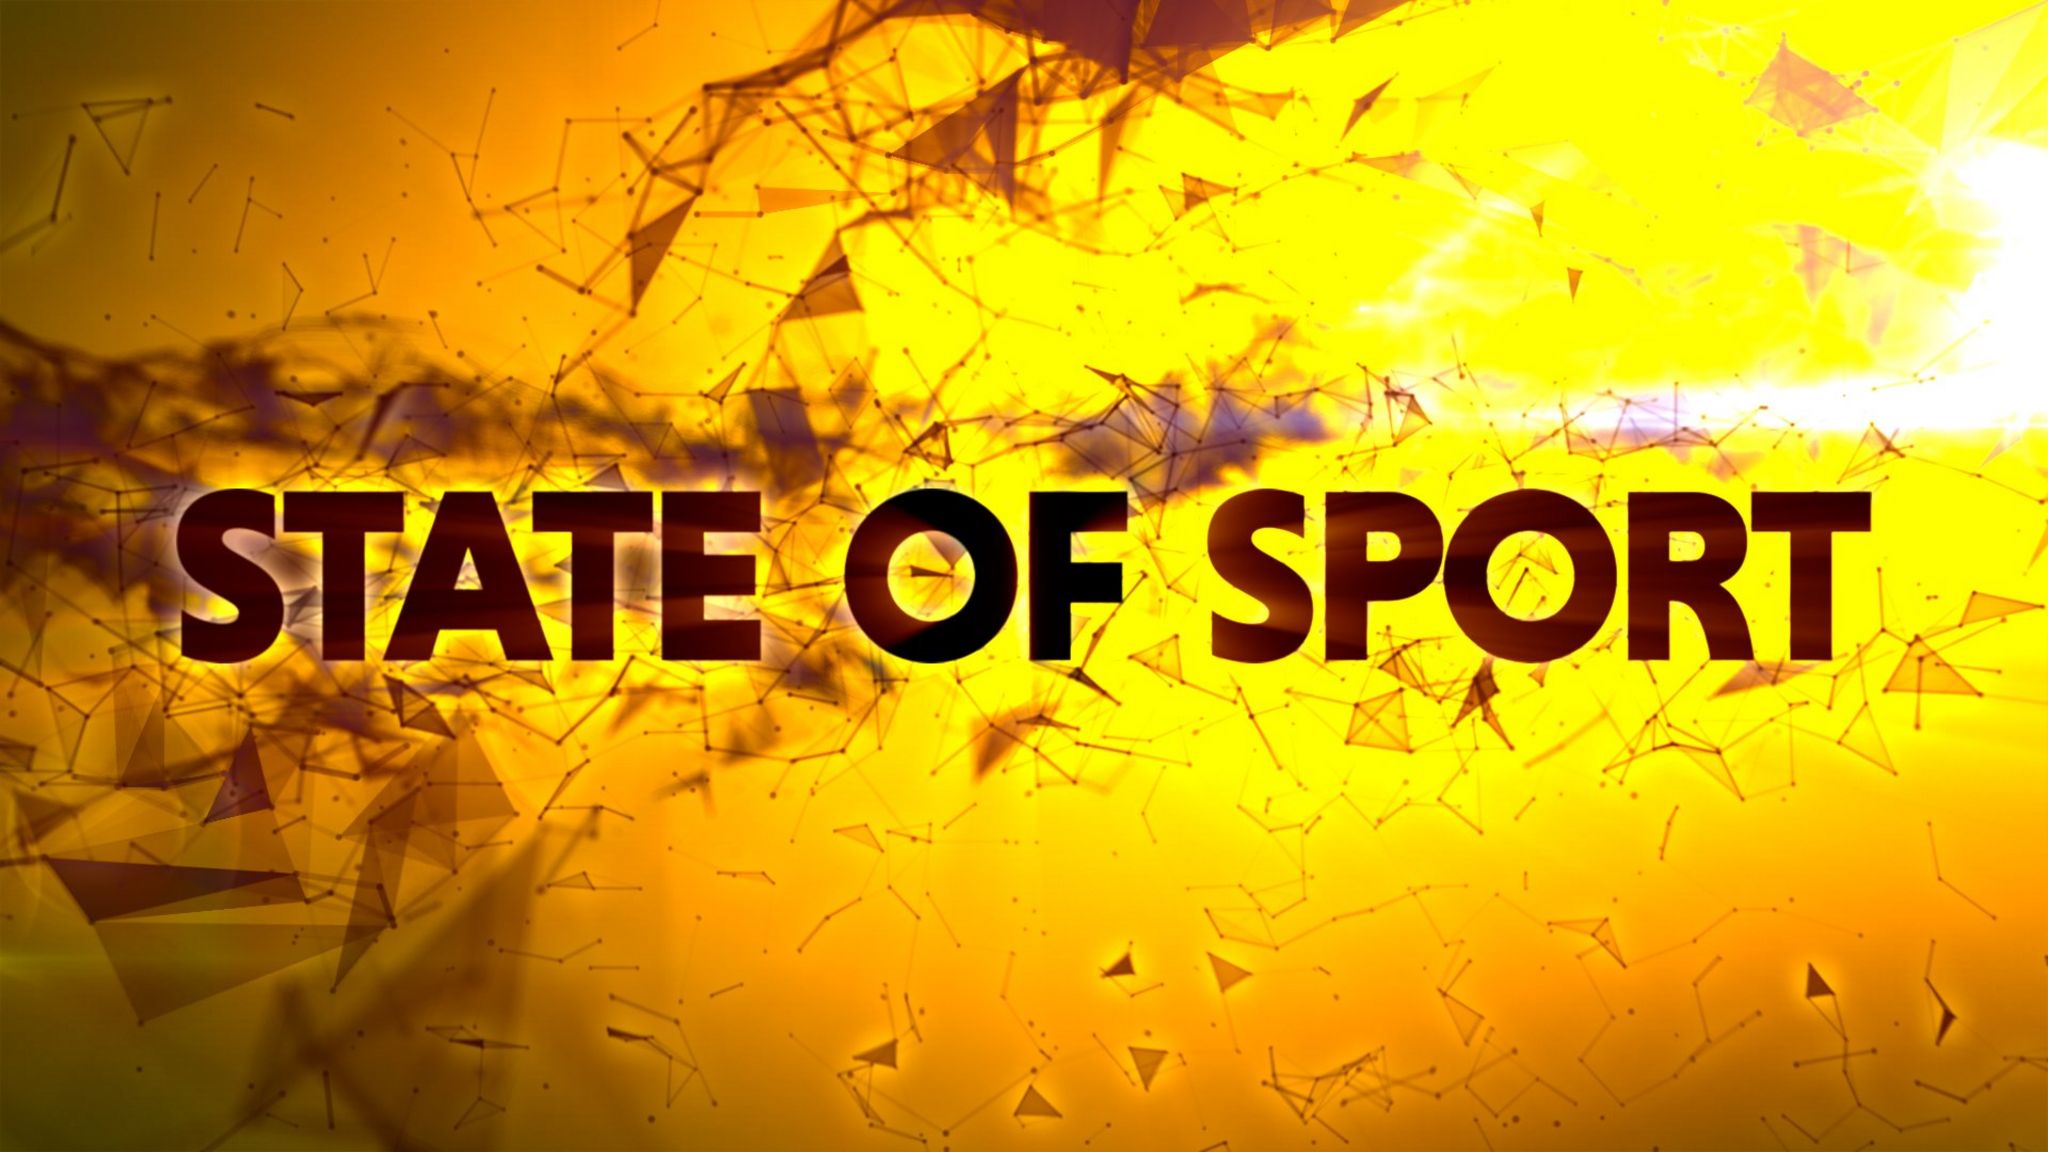 State of sport